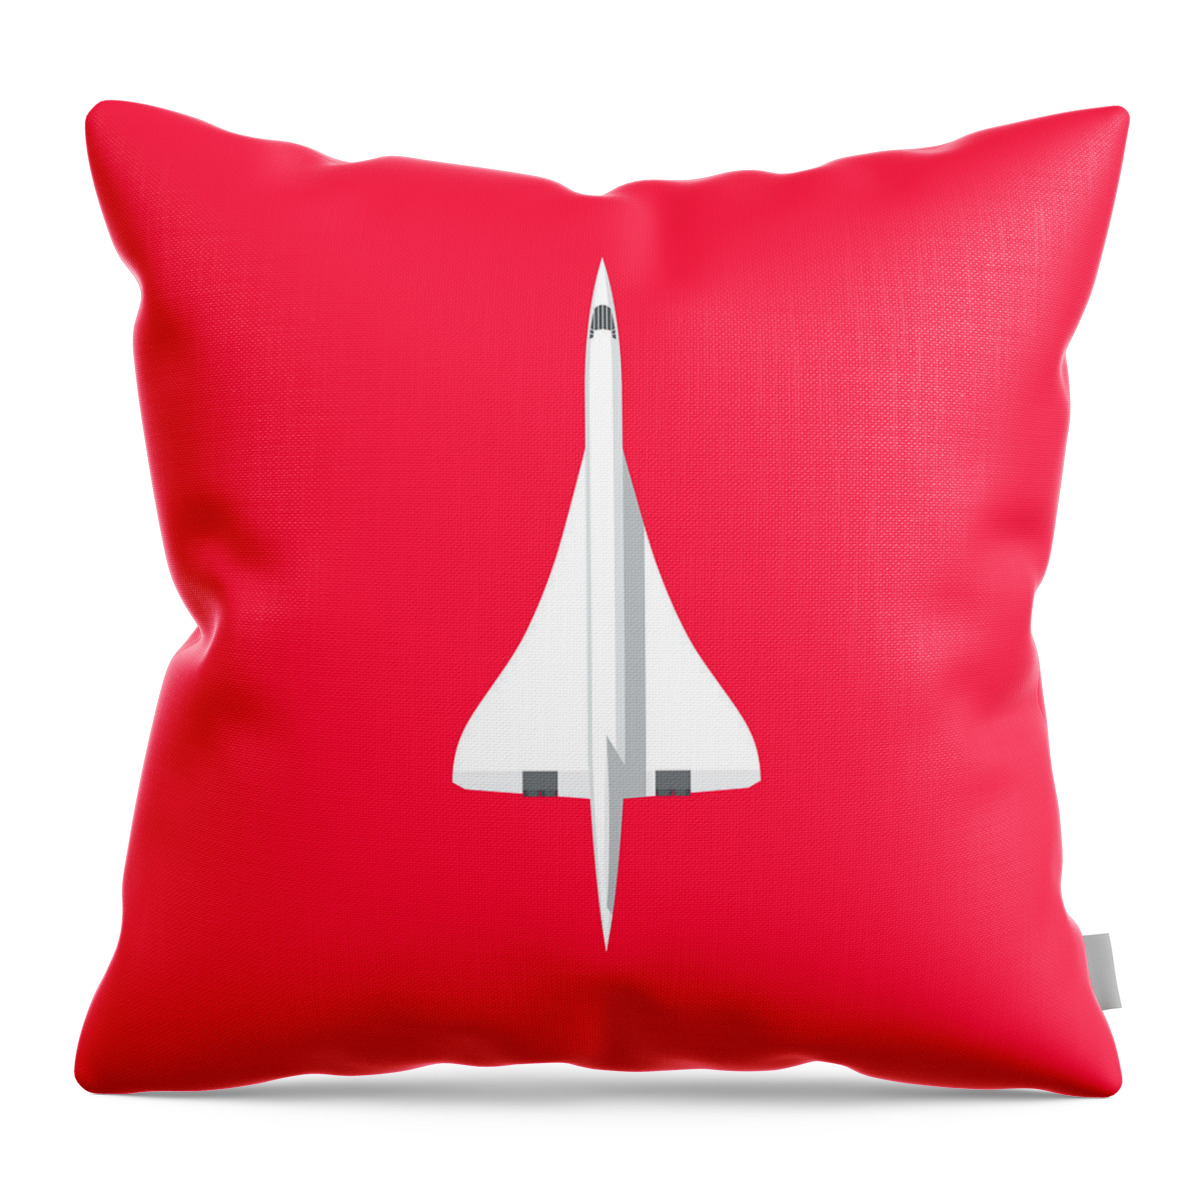 Concorde Throw Pillow featuring the digital art Concorde jet airliner - Crimson by Organic Synthesis